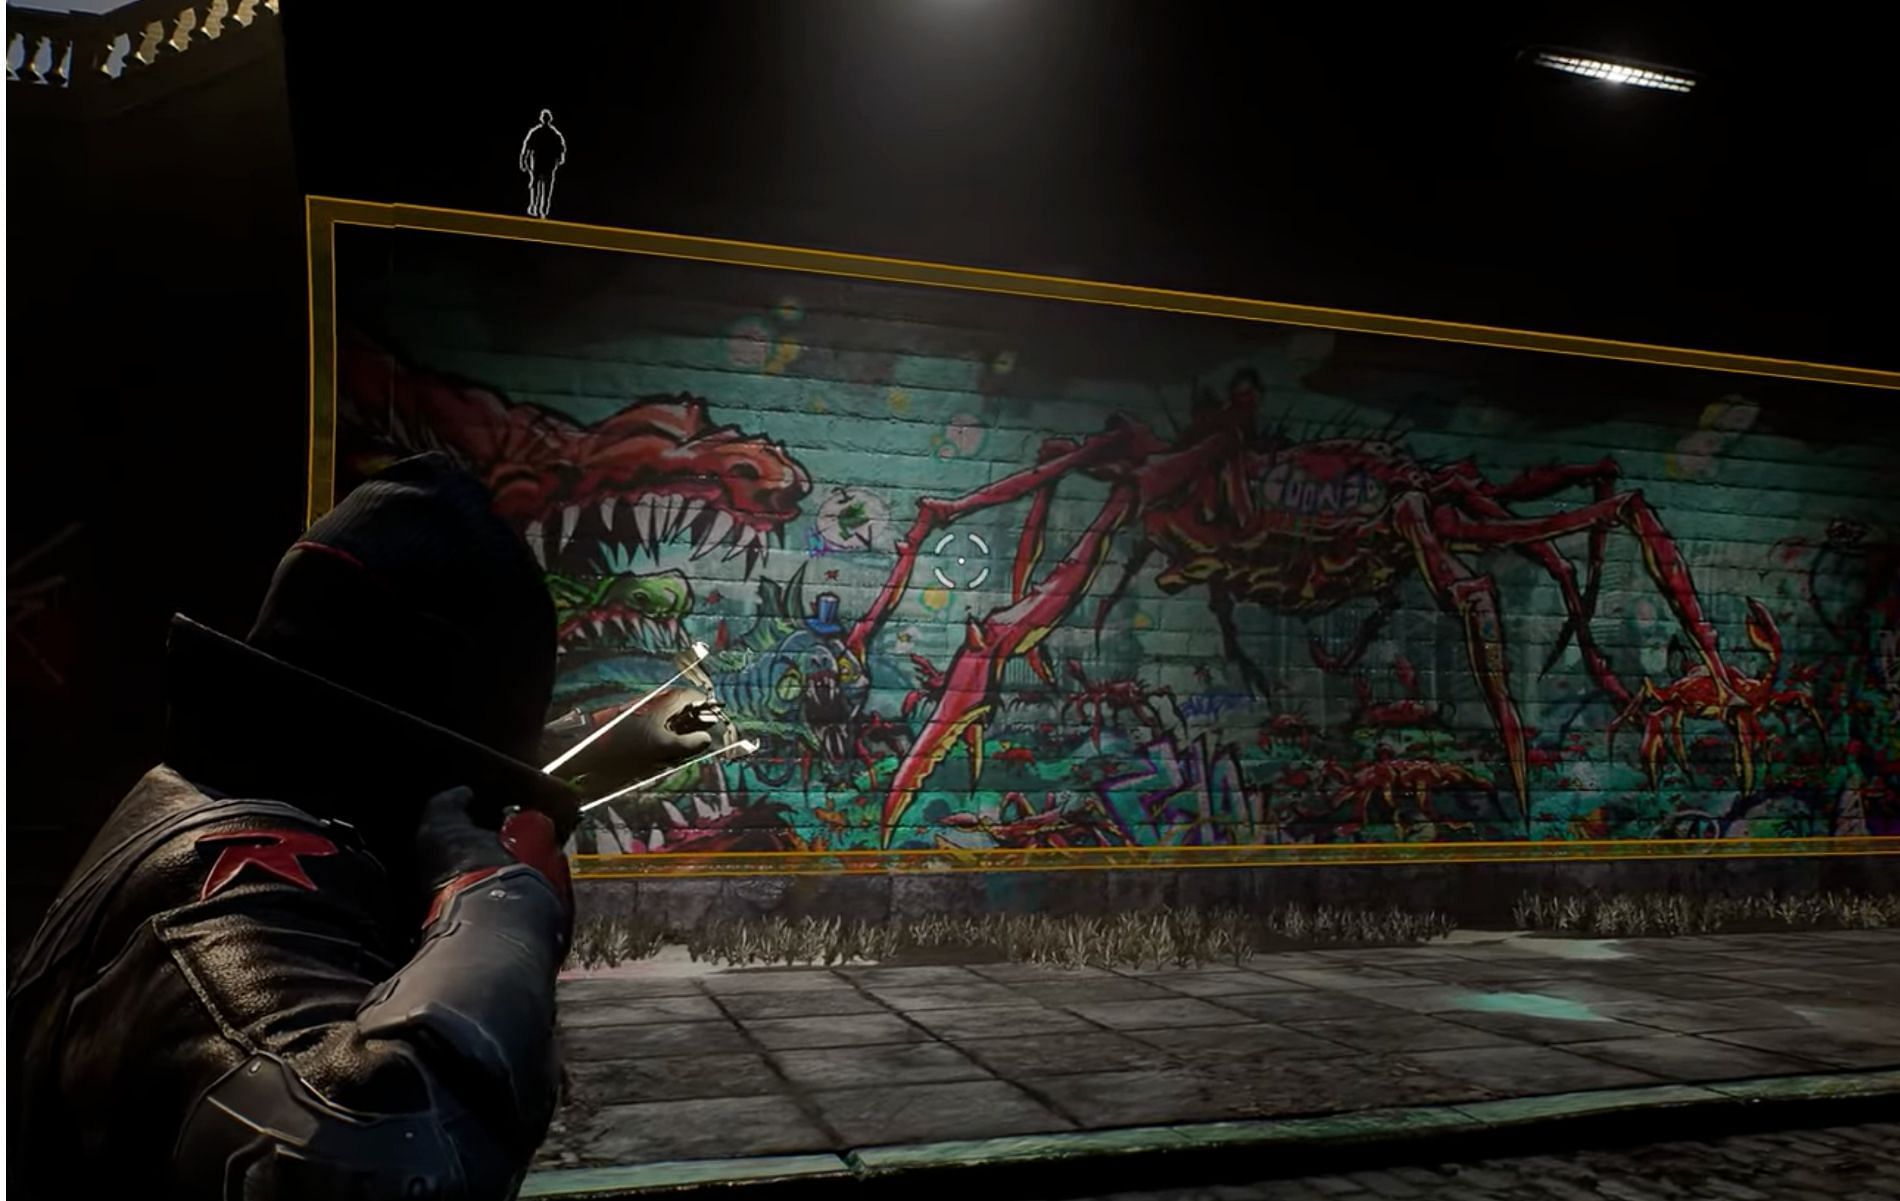 This particular street art in Gotham Knights celebrates the hardy spirit of its citizens (Image via Batman Arkham Videos/YouTube)